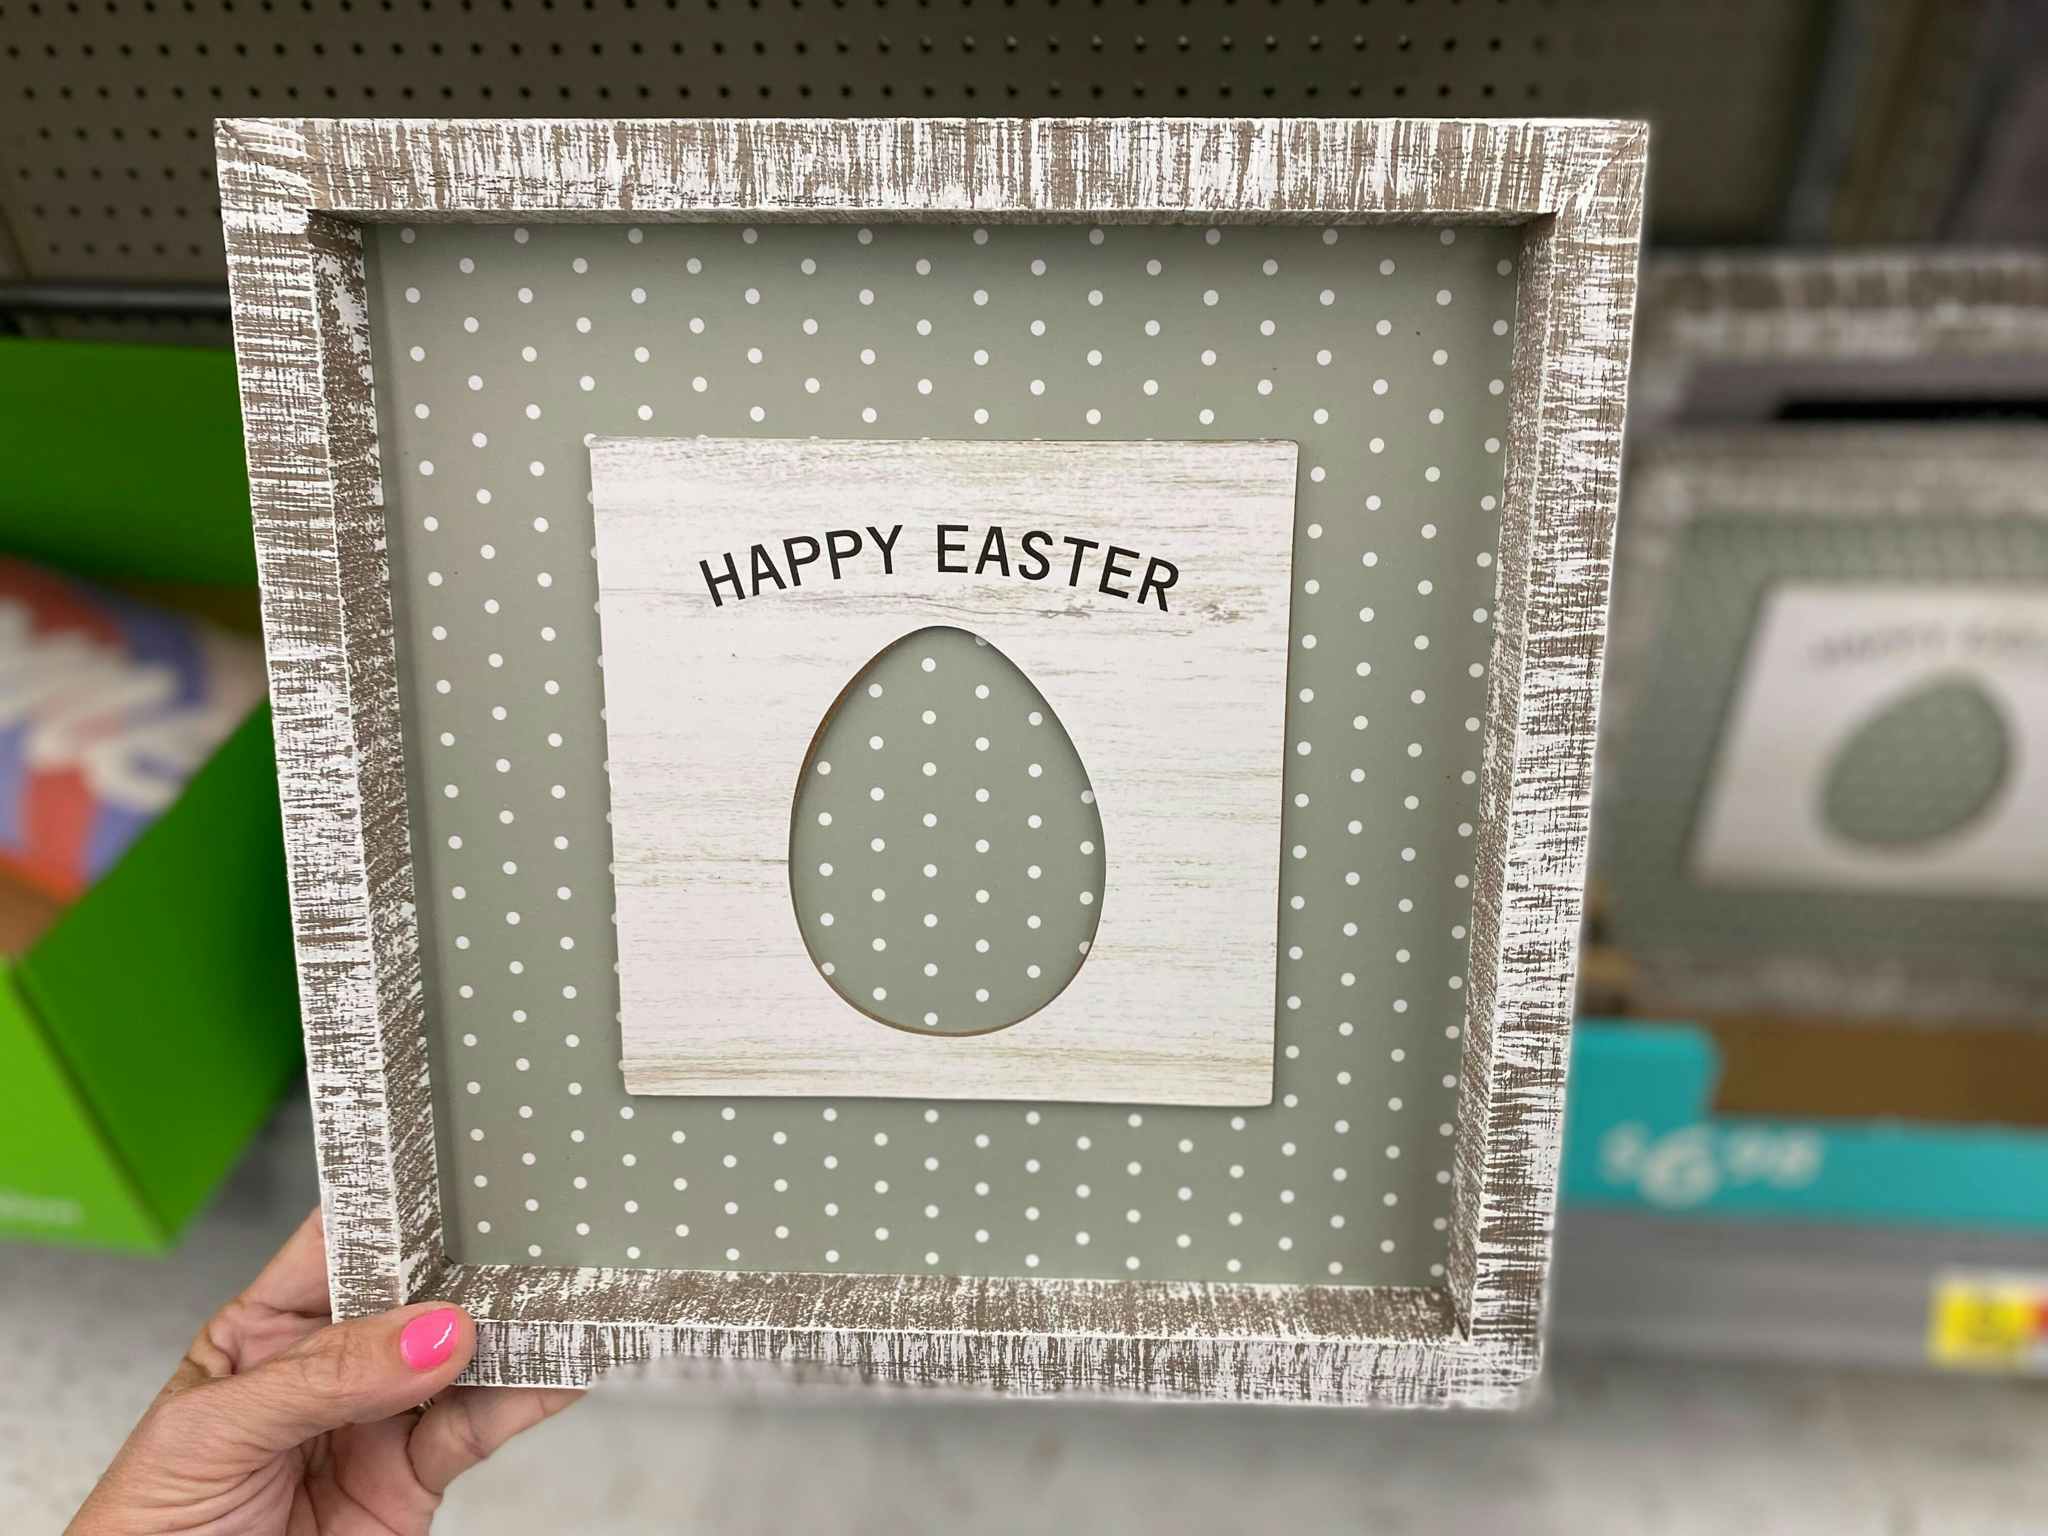 Easter Clearance at Walmart